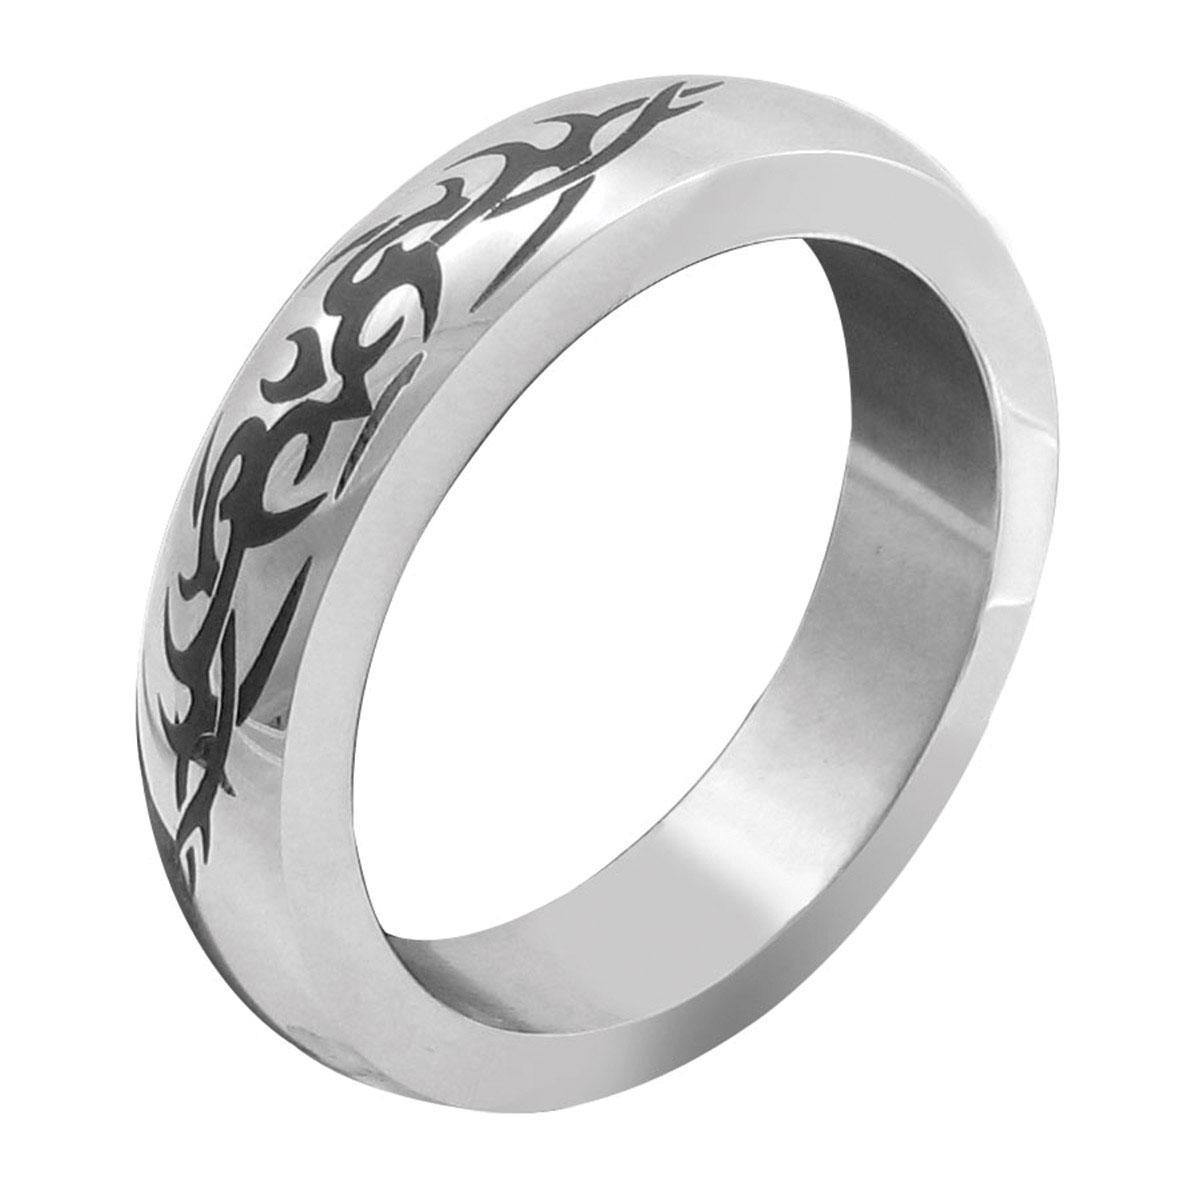 PHS Tribal Band C-Ring - Buy At Luxury Toy X - Free 3-Day Shipping